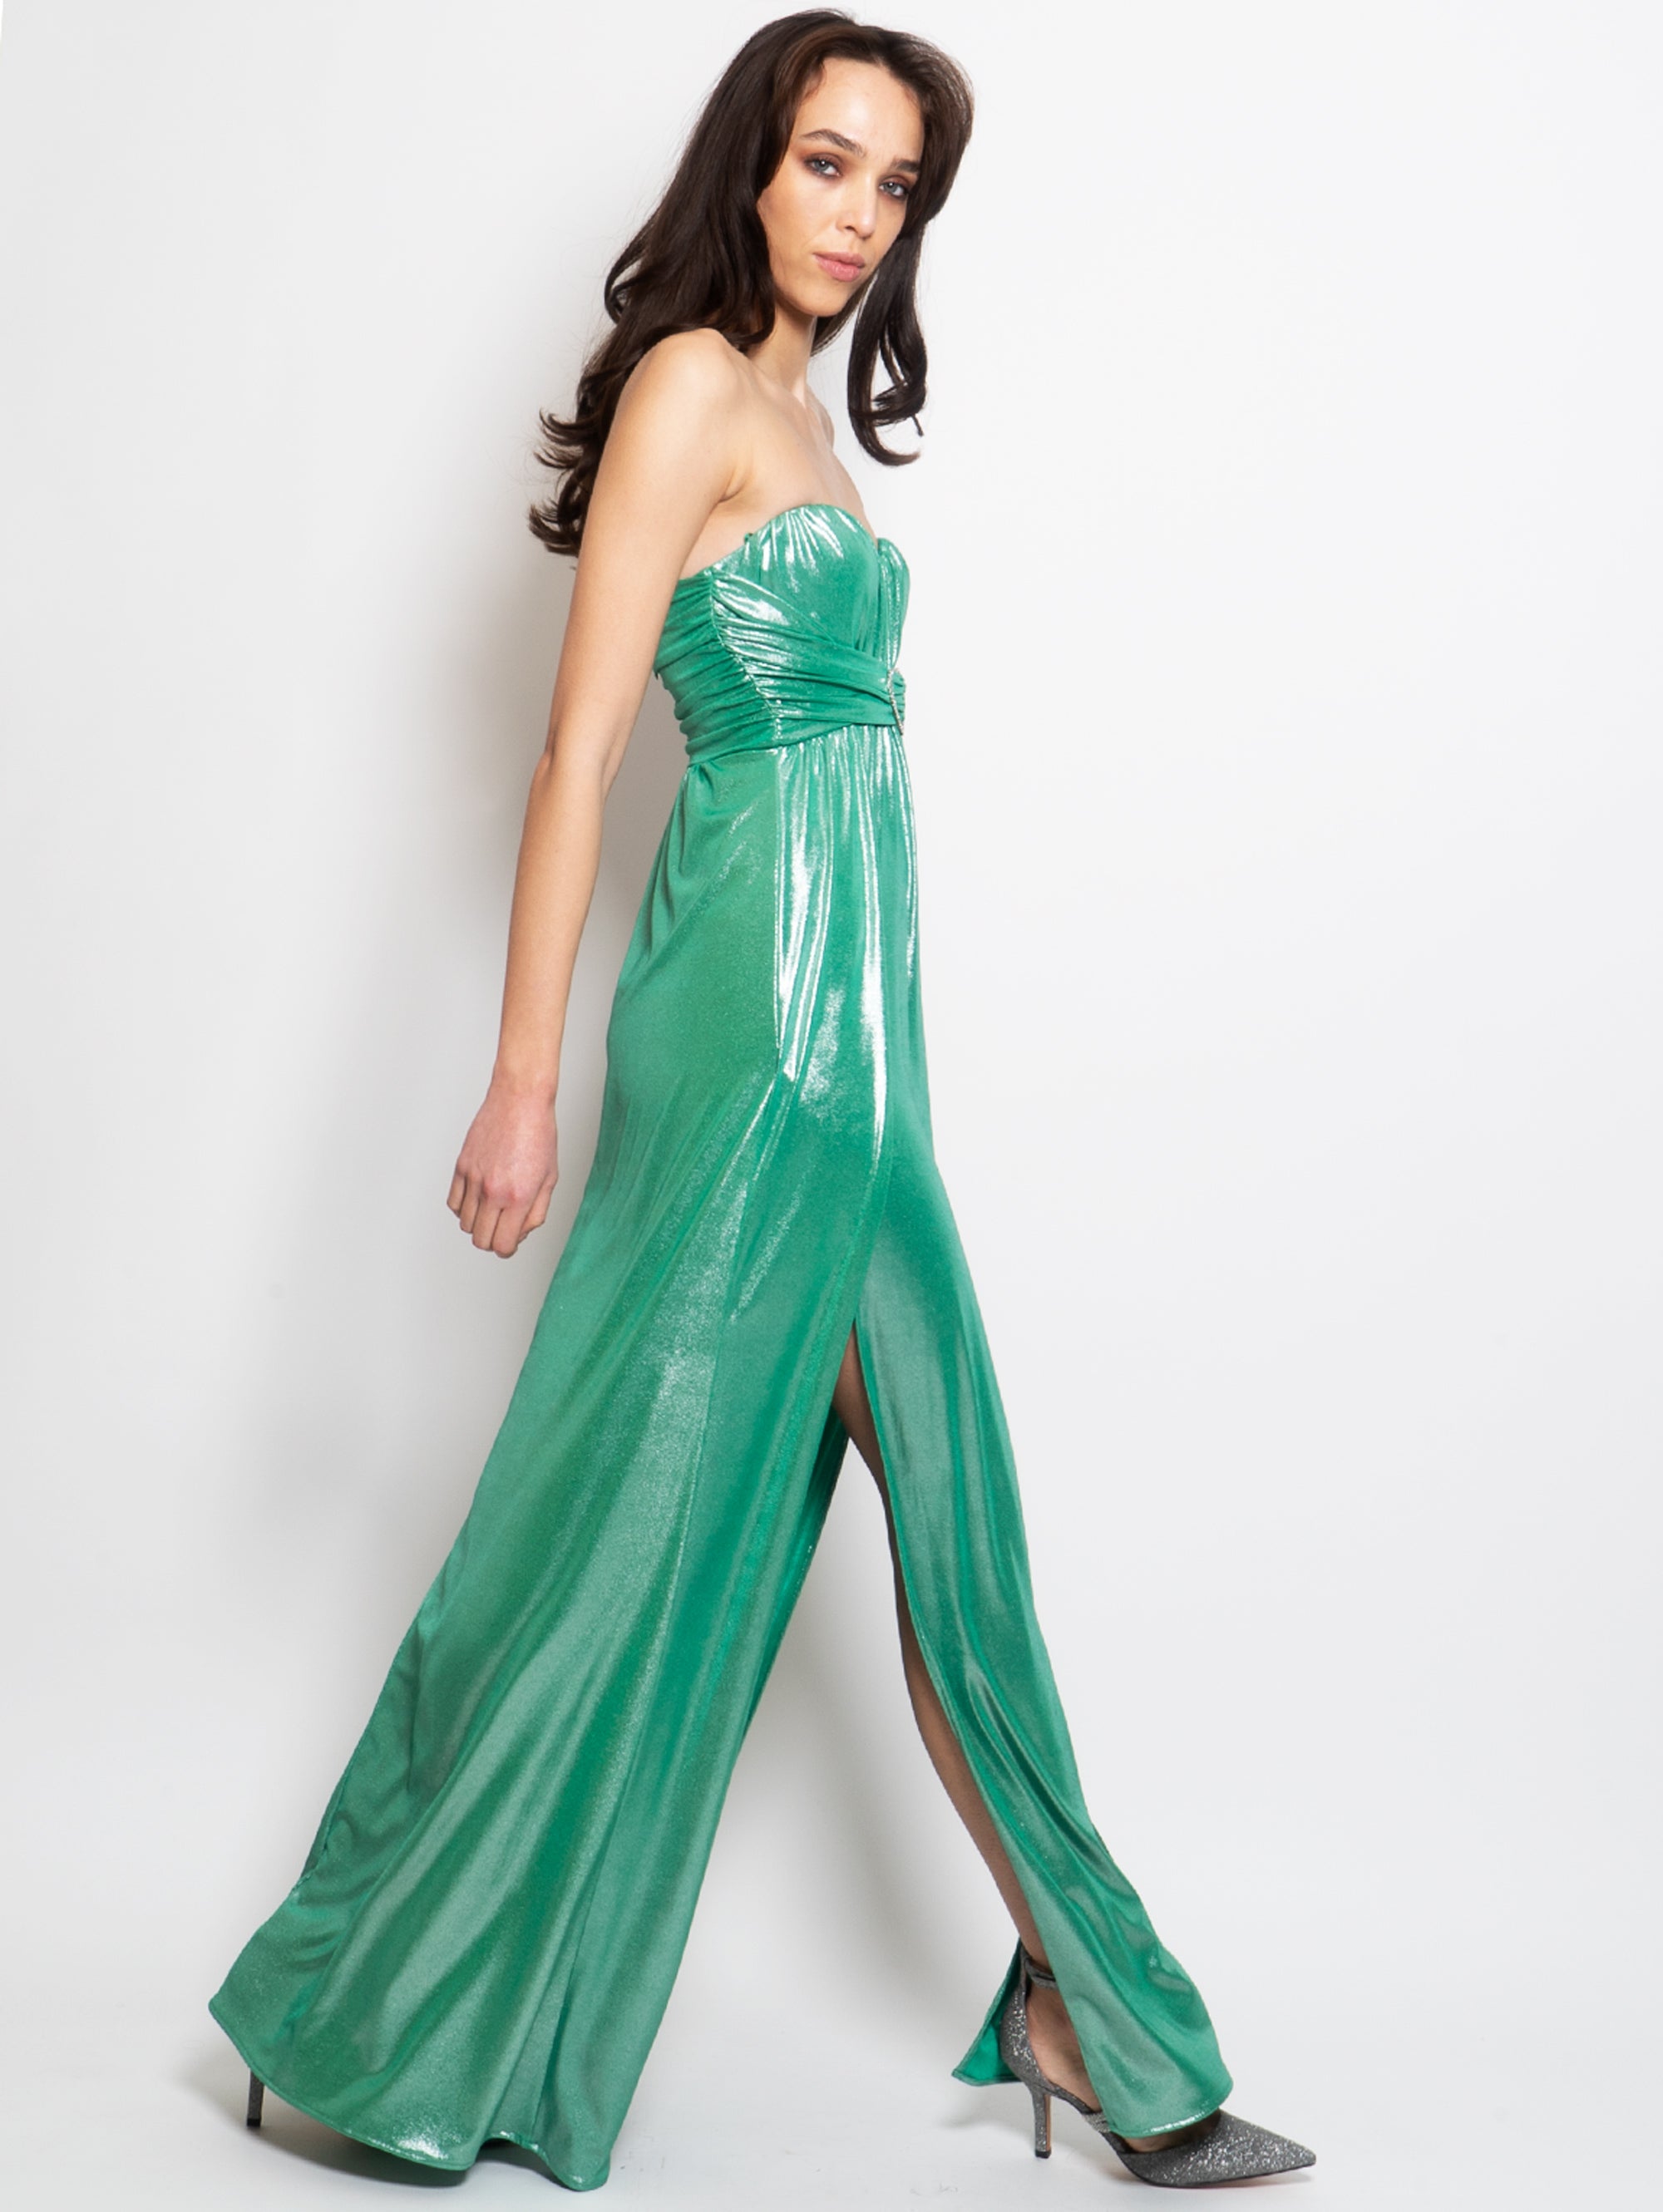 Laminated Dress with Green Heart Neckline